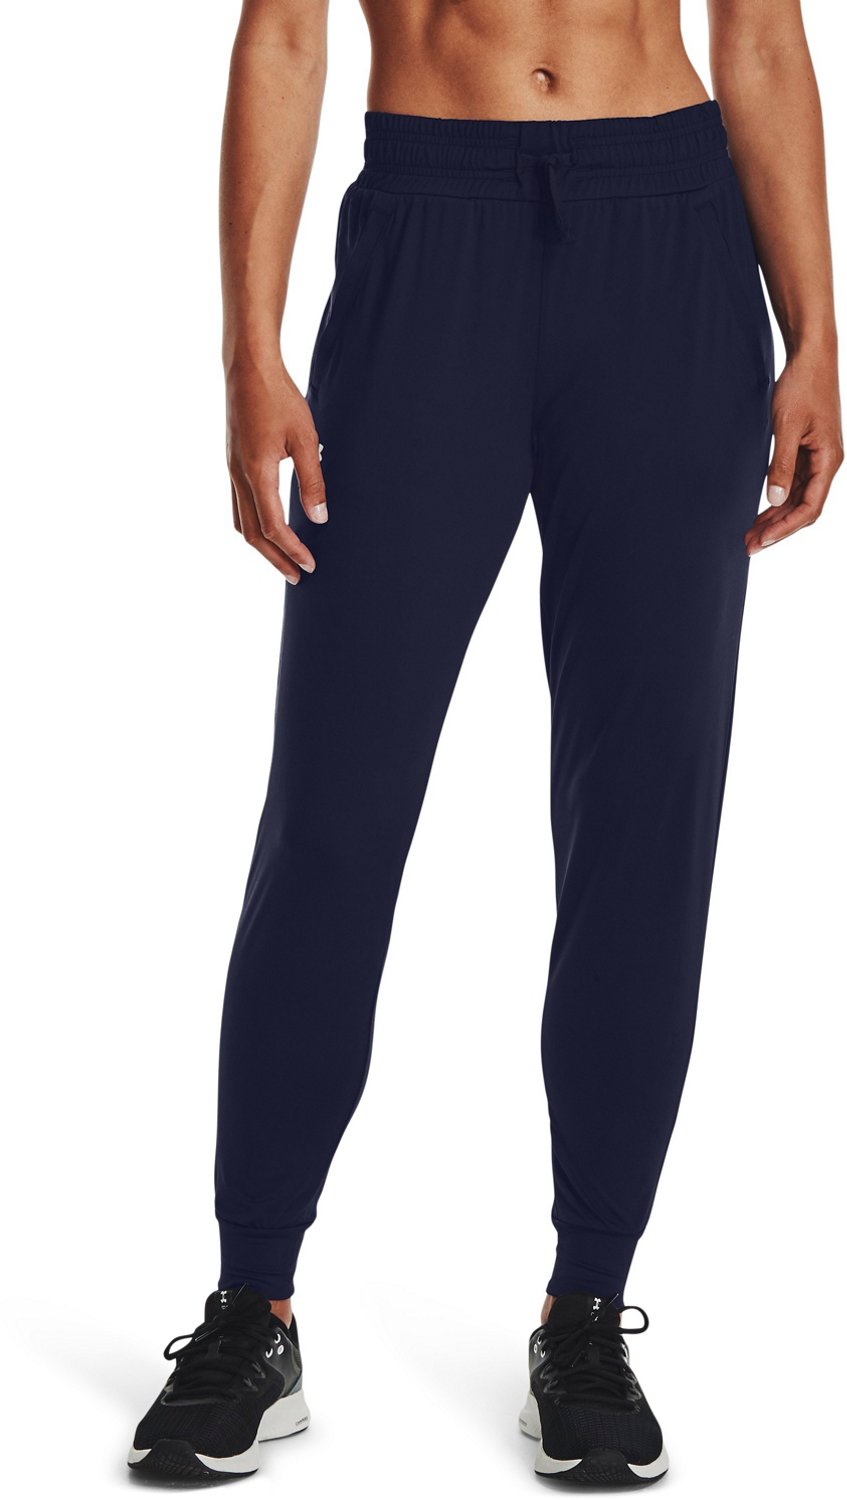 Under Armour Women Womens Storm Drawstring Woven Athletic Pants